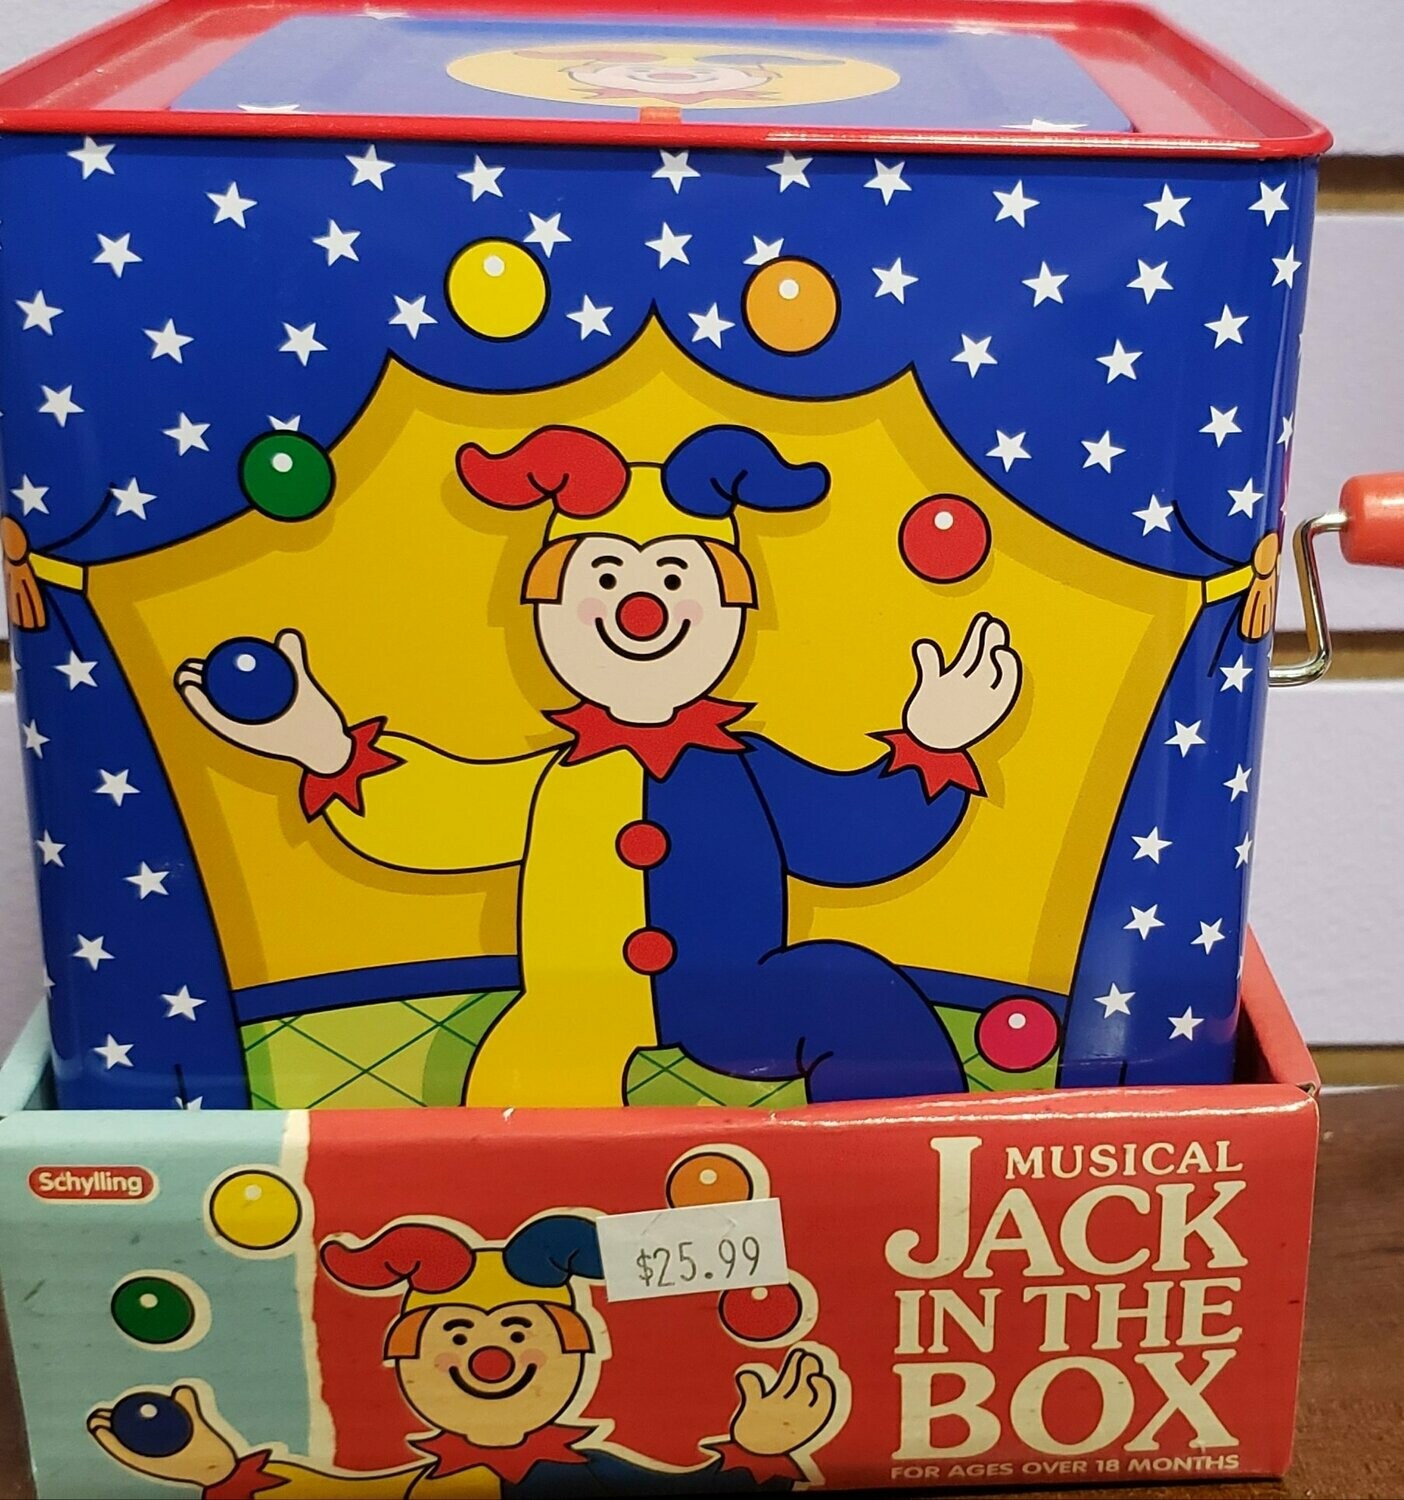 in SILLY CIRCUS CLOWN Box Jack 